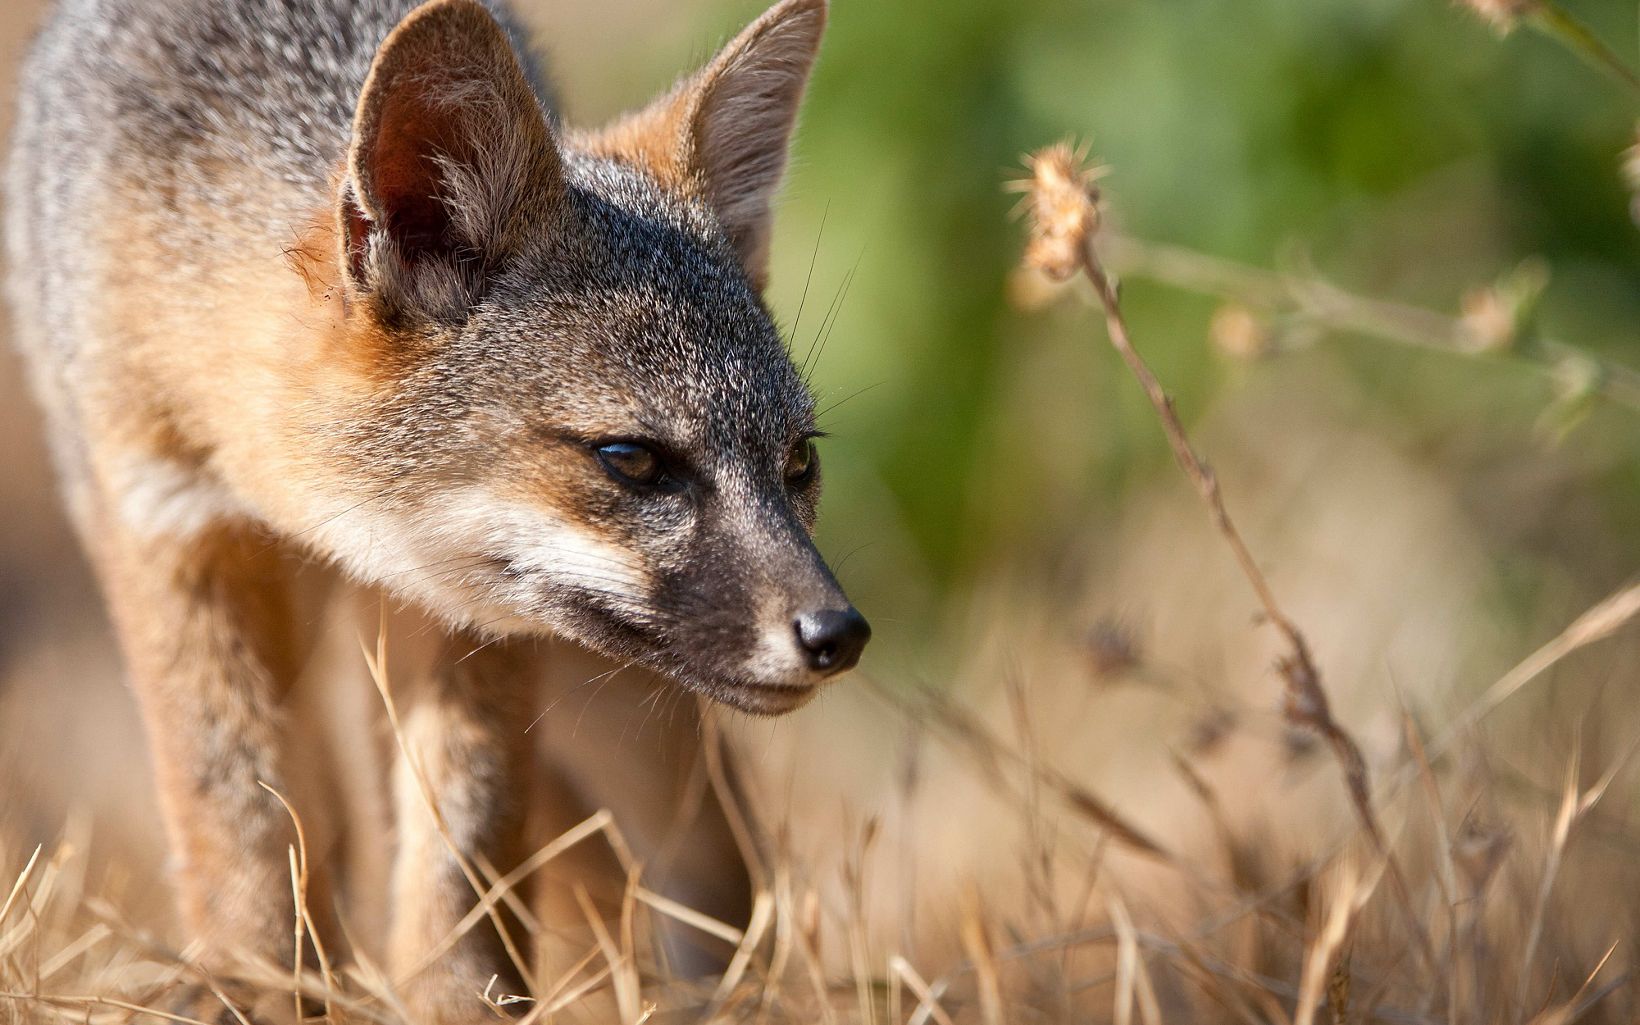 Channel Island Fox in Channel Islands National Park, California. The island fox is an ICUN Red List endangered species. © Ian Shive